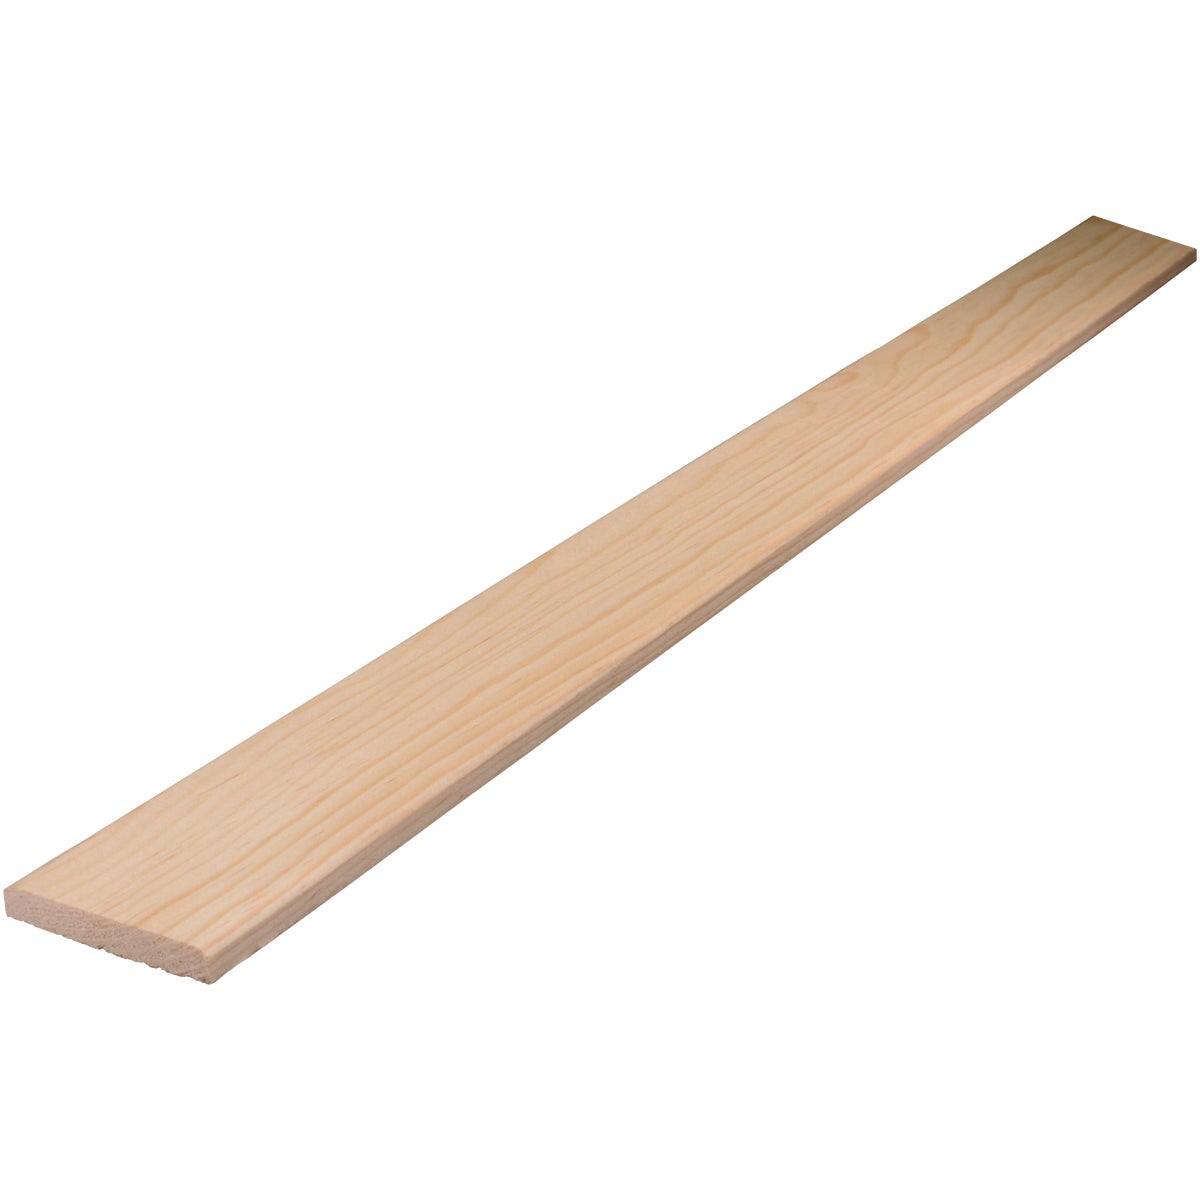 Alexandria Moulding 3/8 In. W. x 2-1/4 In. H. x 8 Ft. Solid Pine Panel Strip Mullion